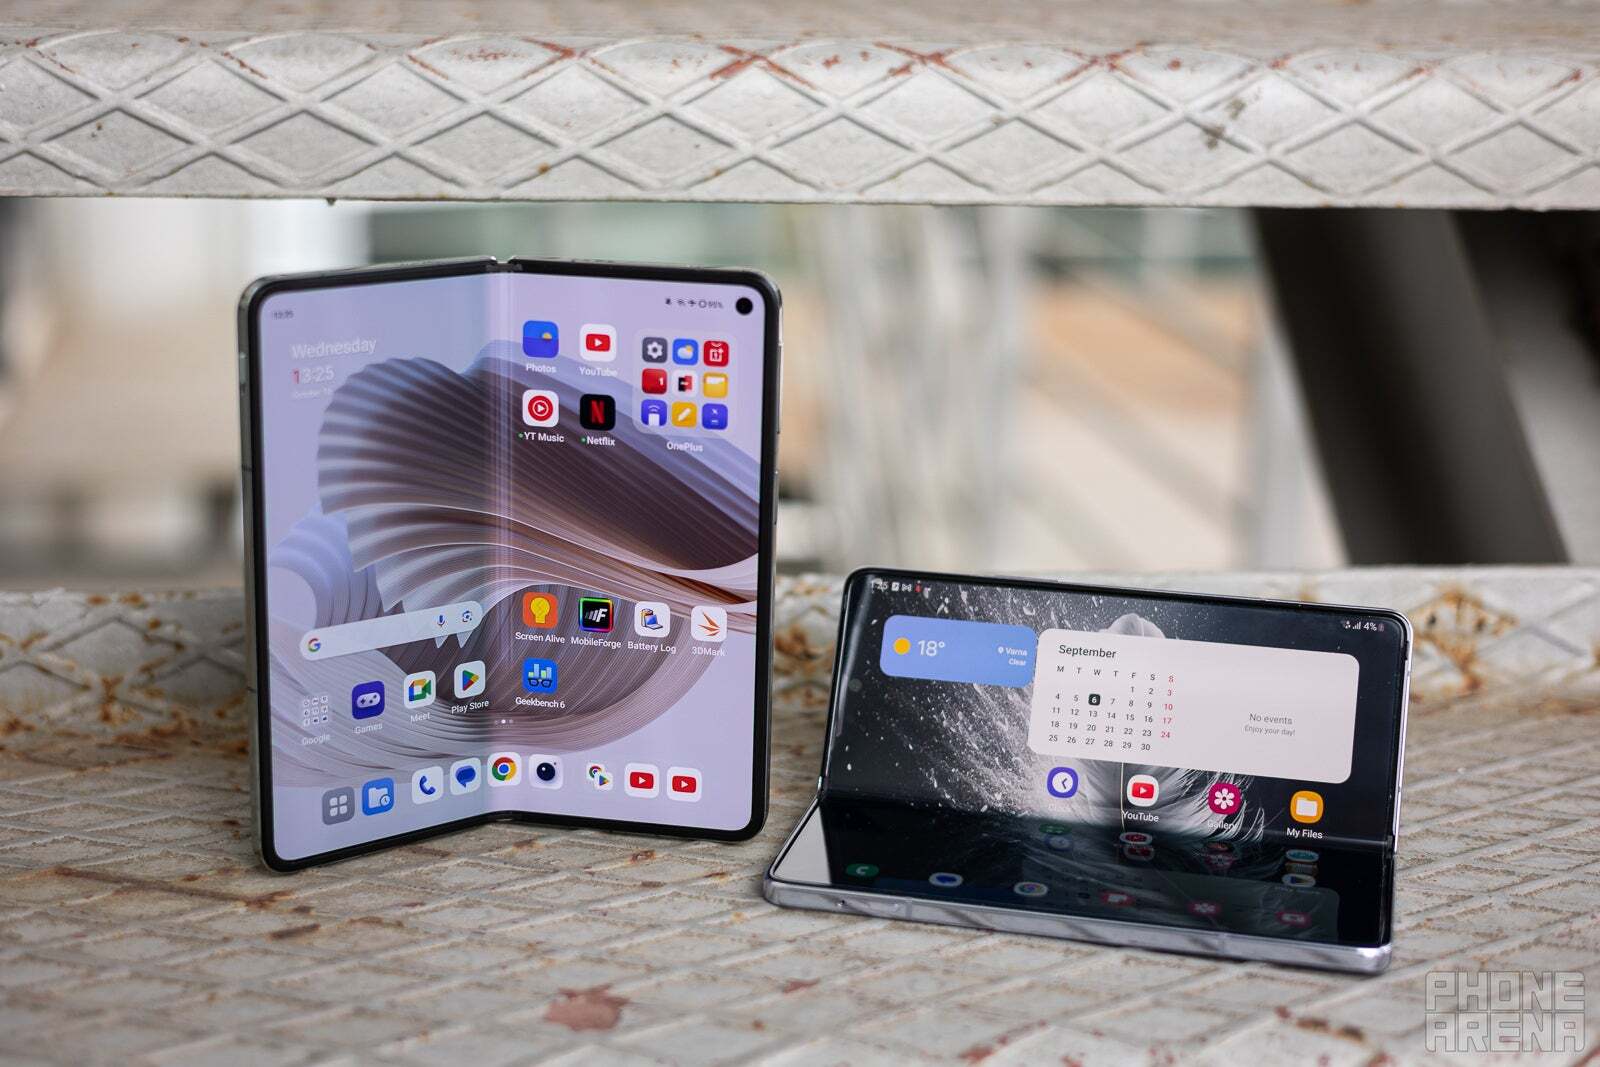 Foldable phones already have killer screens, both indoors and out - Apple hasn't given up on a foldable iPhone, it just doesn't need one